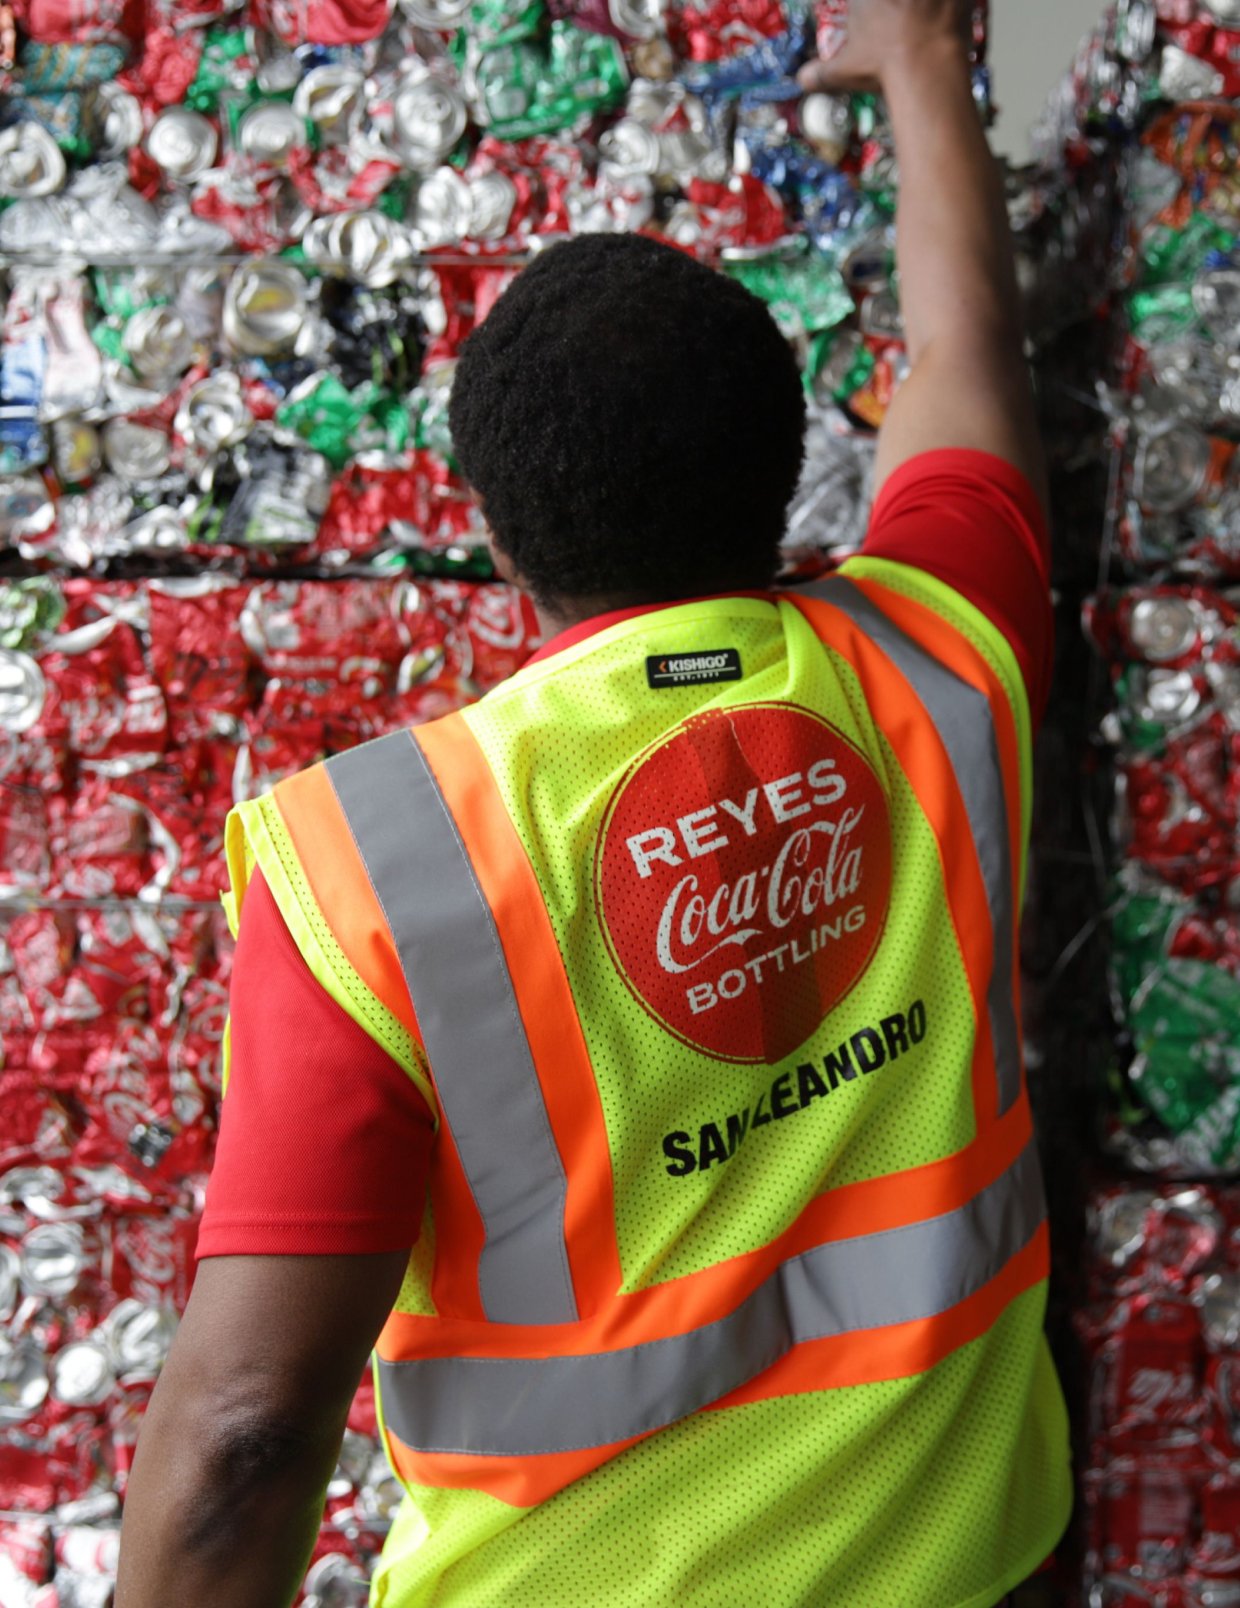 The man is doing something with crushed recyclable cans